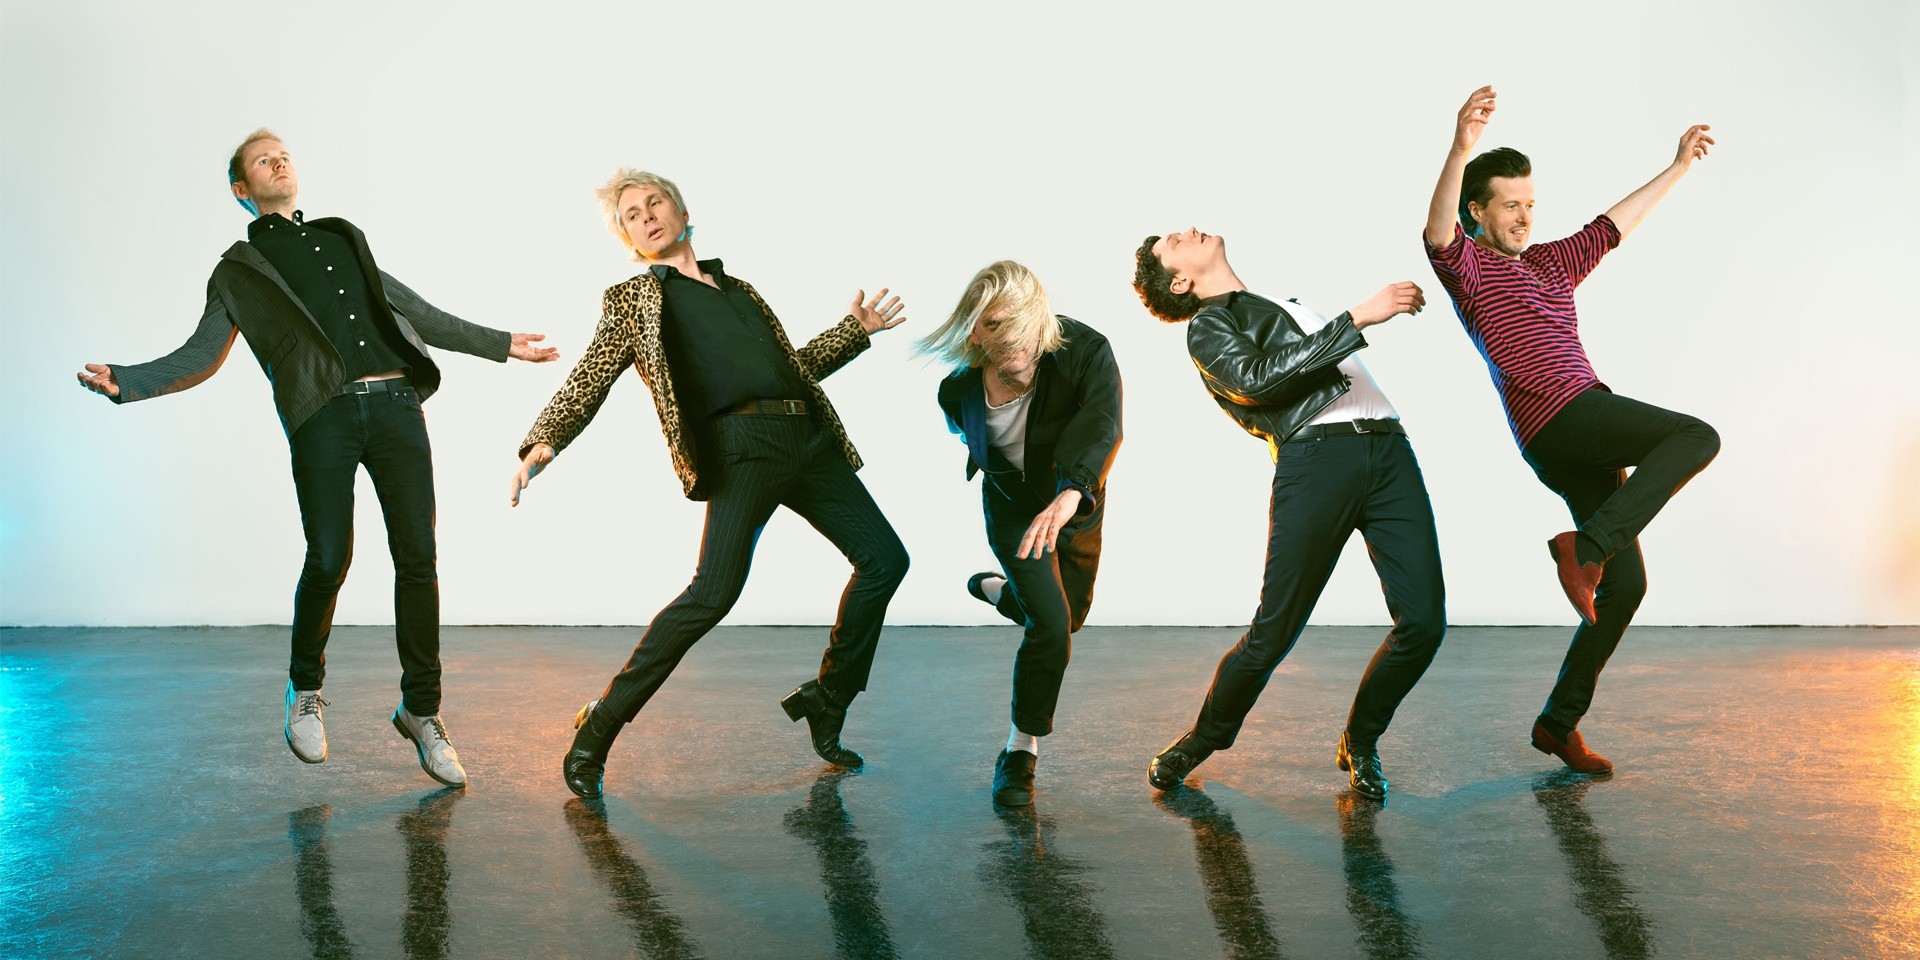 Franz Ferdinand are coming to Singapore